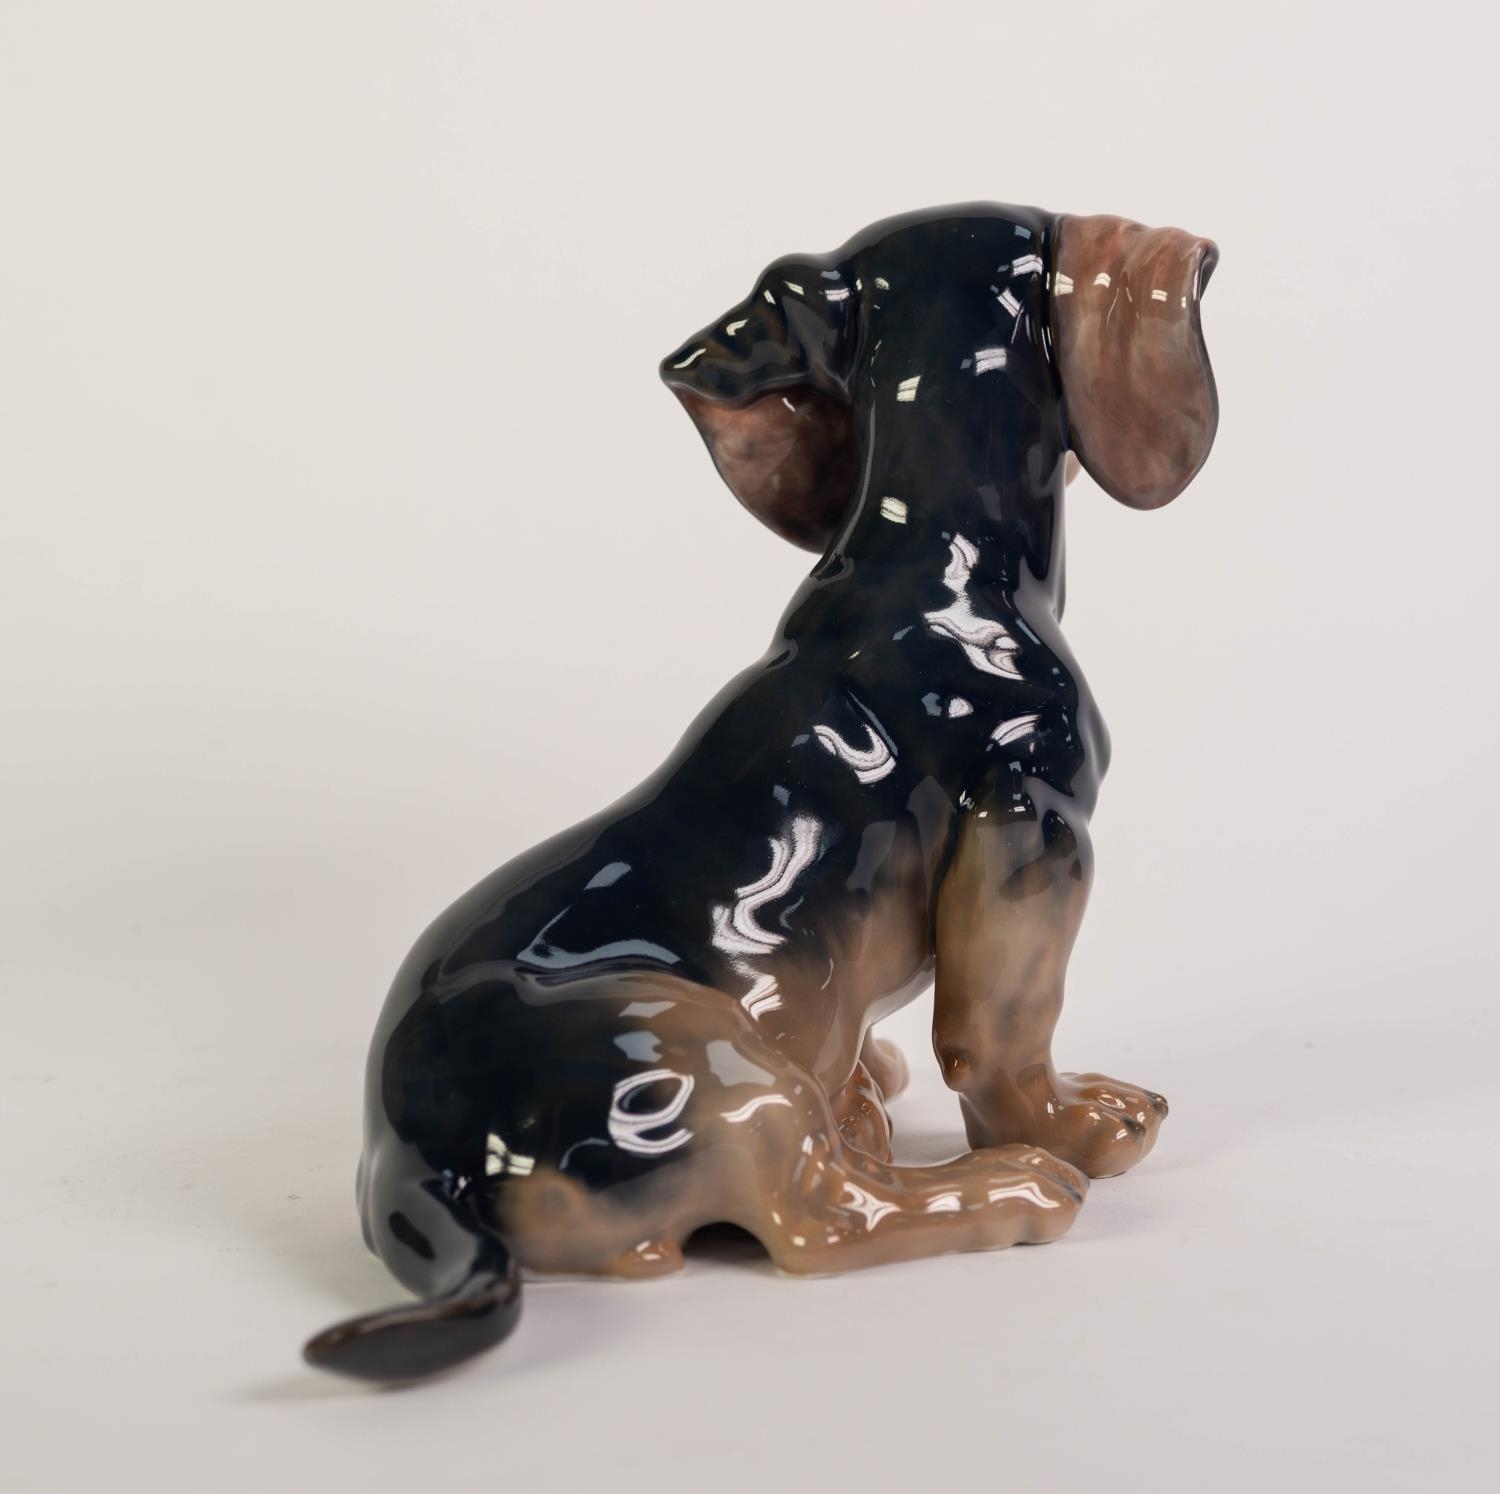 ROYAL COPENHAGEN PORCELAIN MODEL OF A DACHSHUND PUPPY, painted in natural tones and modelled - Image 3 of 4